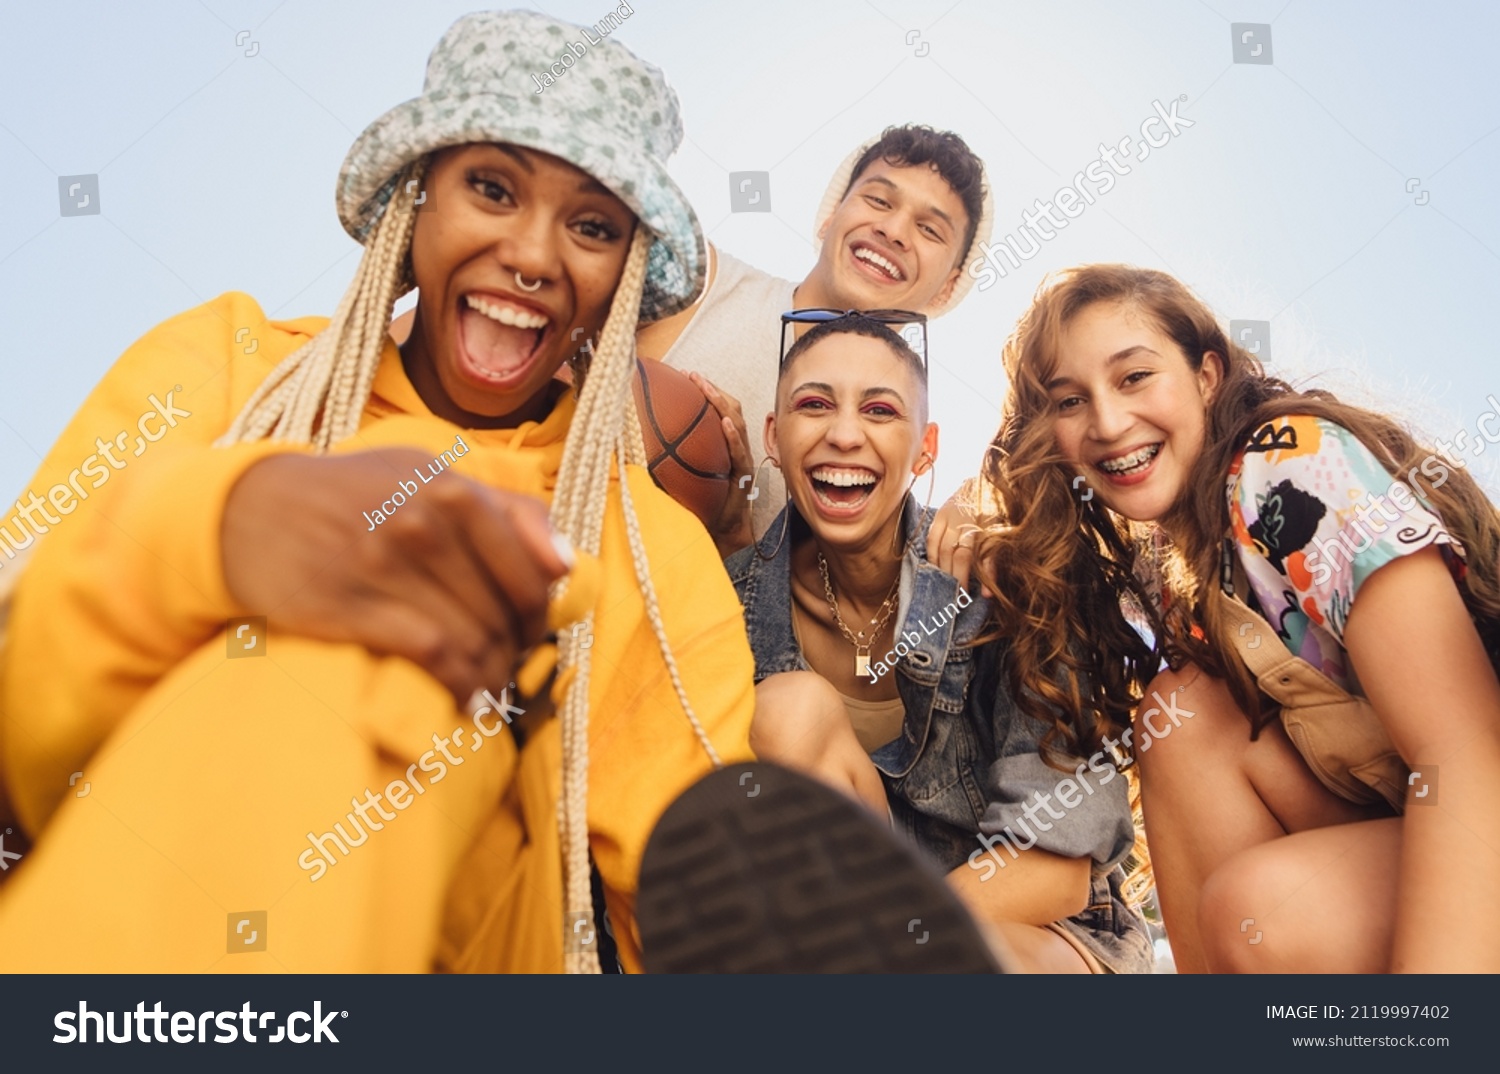 Cheerful generation z friends having fun together outdoors. Group of multiethnic friends smiling at the camera cheerfully. Vibrant young people making happy memories together. #2119997402